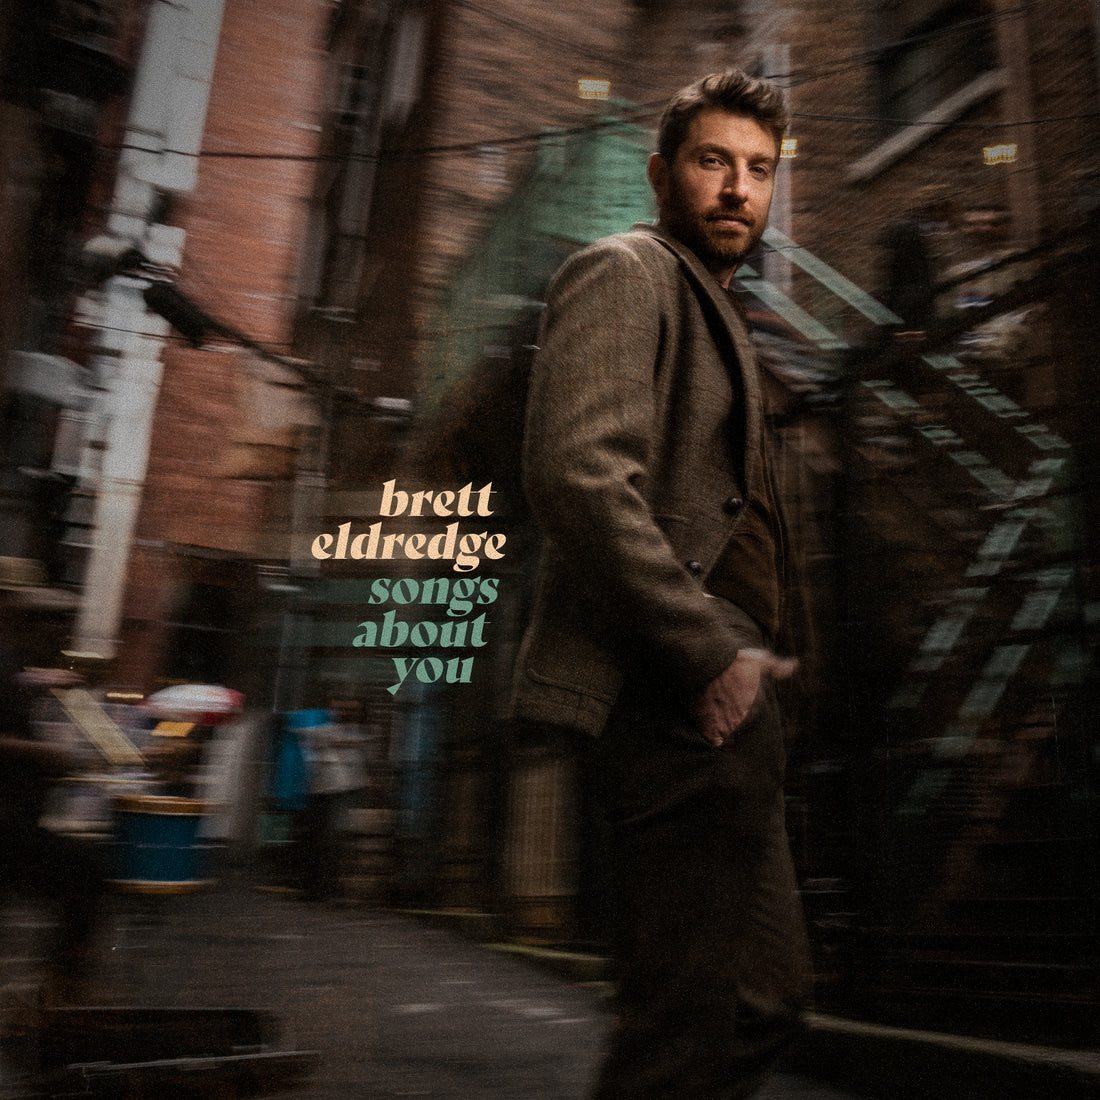 Brett Eldredge Moves Through Time With Musical Flashbacks On New Single “Songs About You”